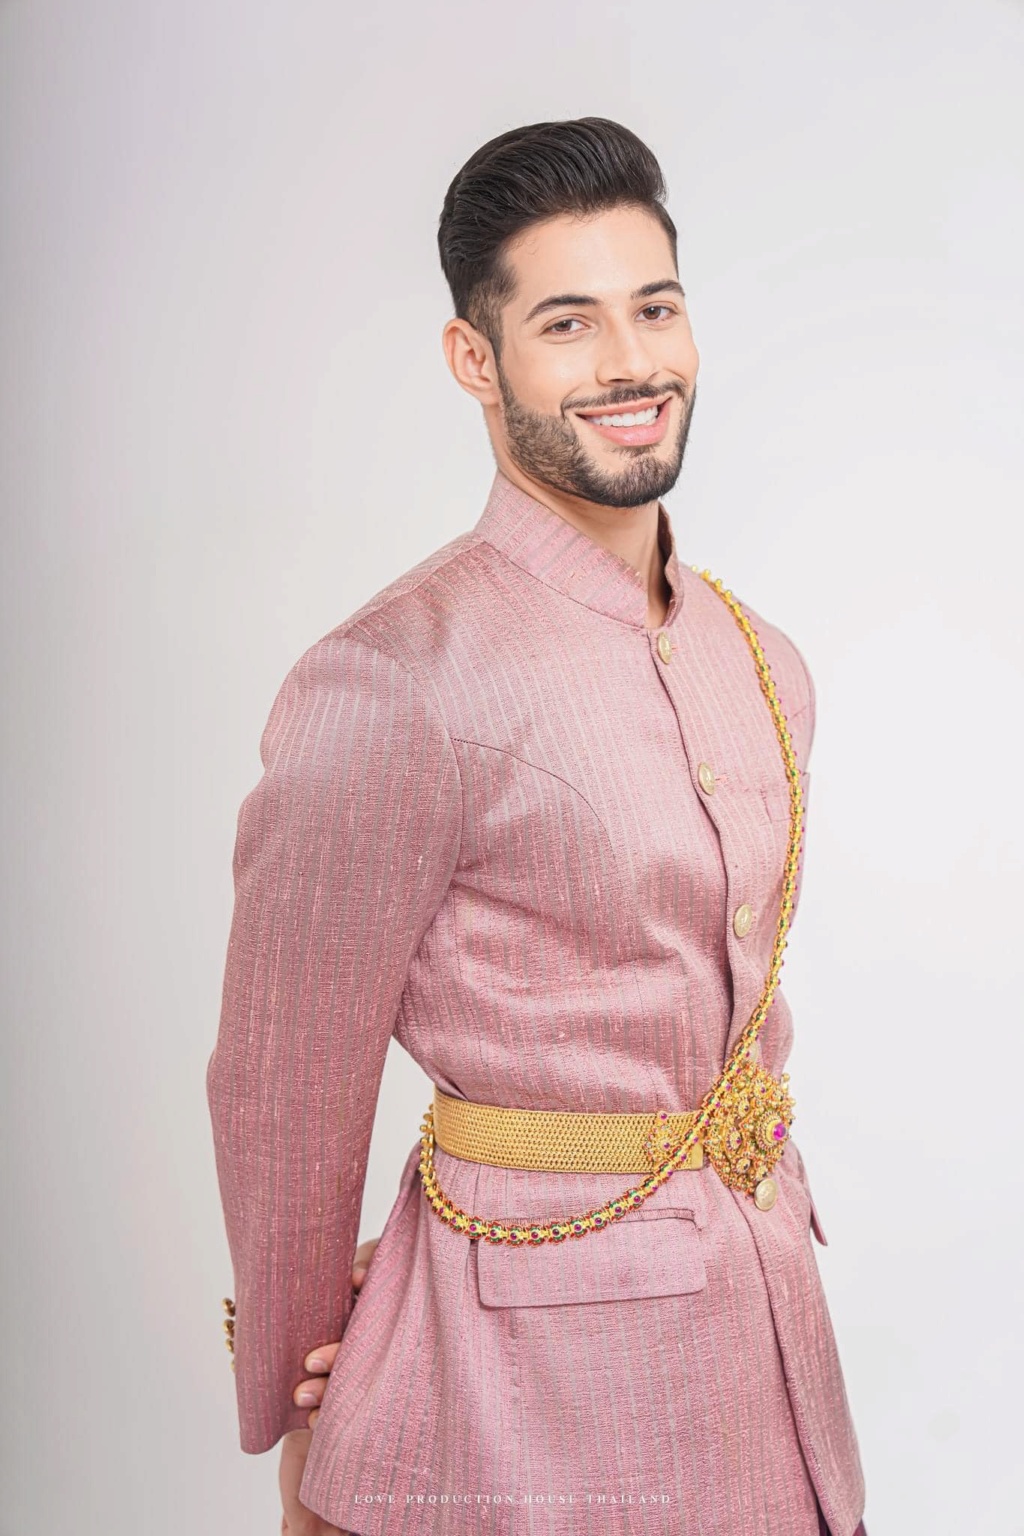 Manuel Franco - MISTER INTERNATIONAL 2022 - Official Thread (DOMINICAN REPUBLIC) Thai Version - Page 3 34064410